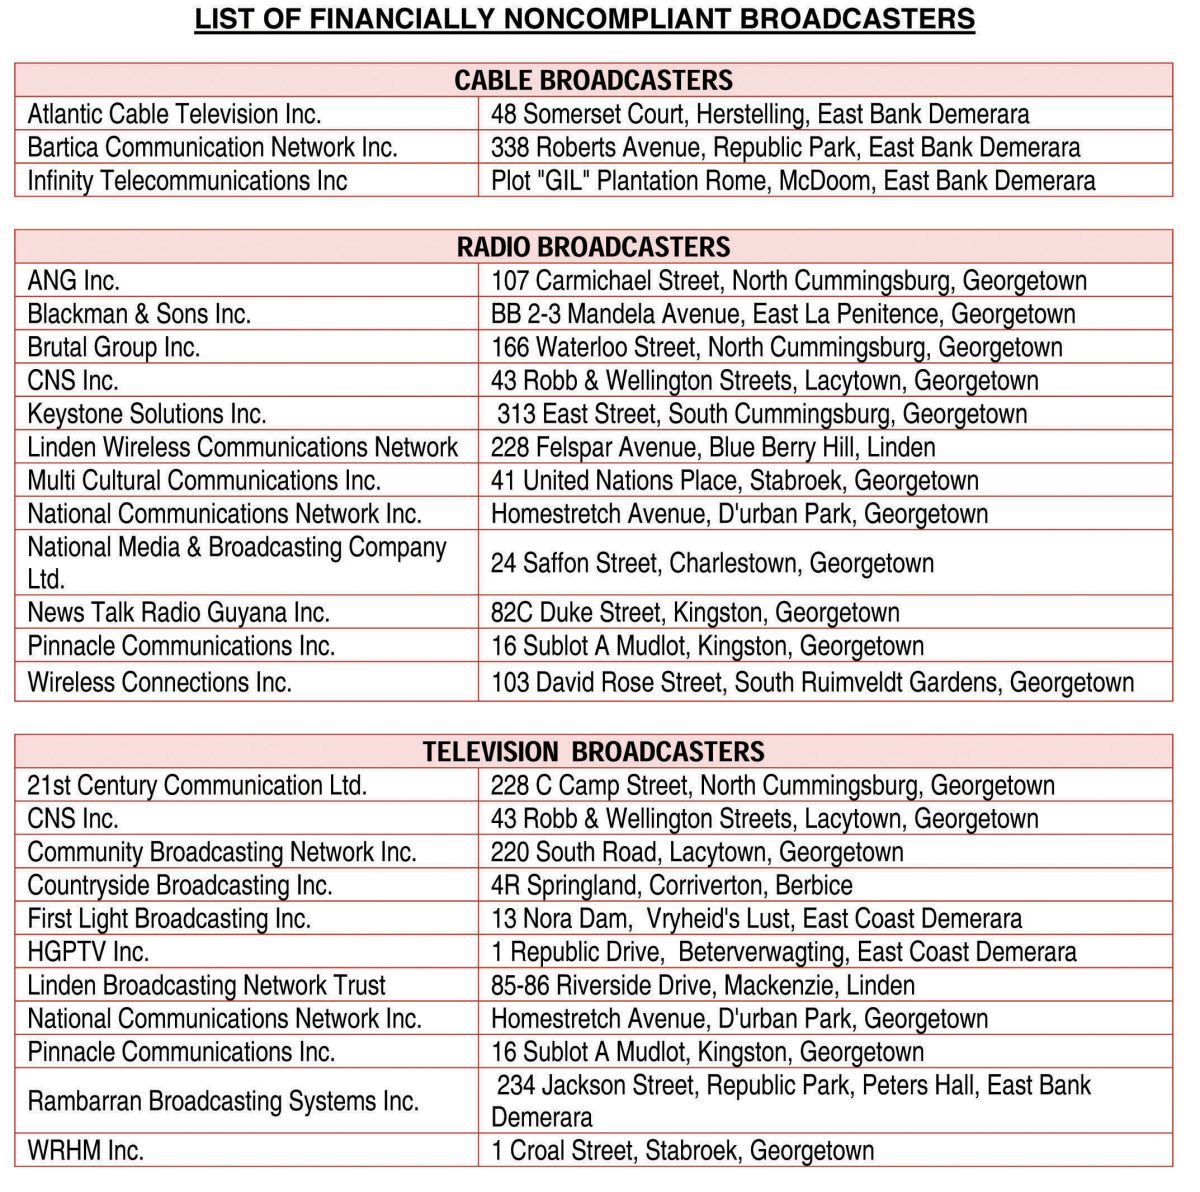 The list which was released by the GNBA of financially noncompliant broadcasters. 
